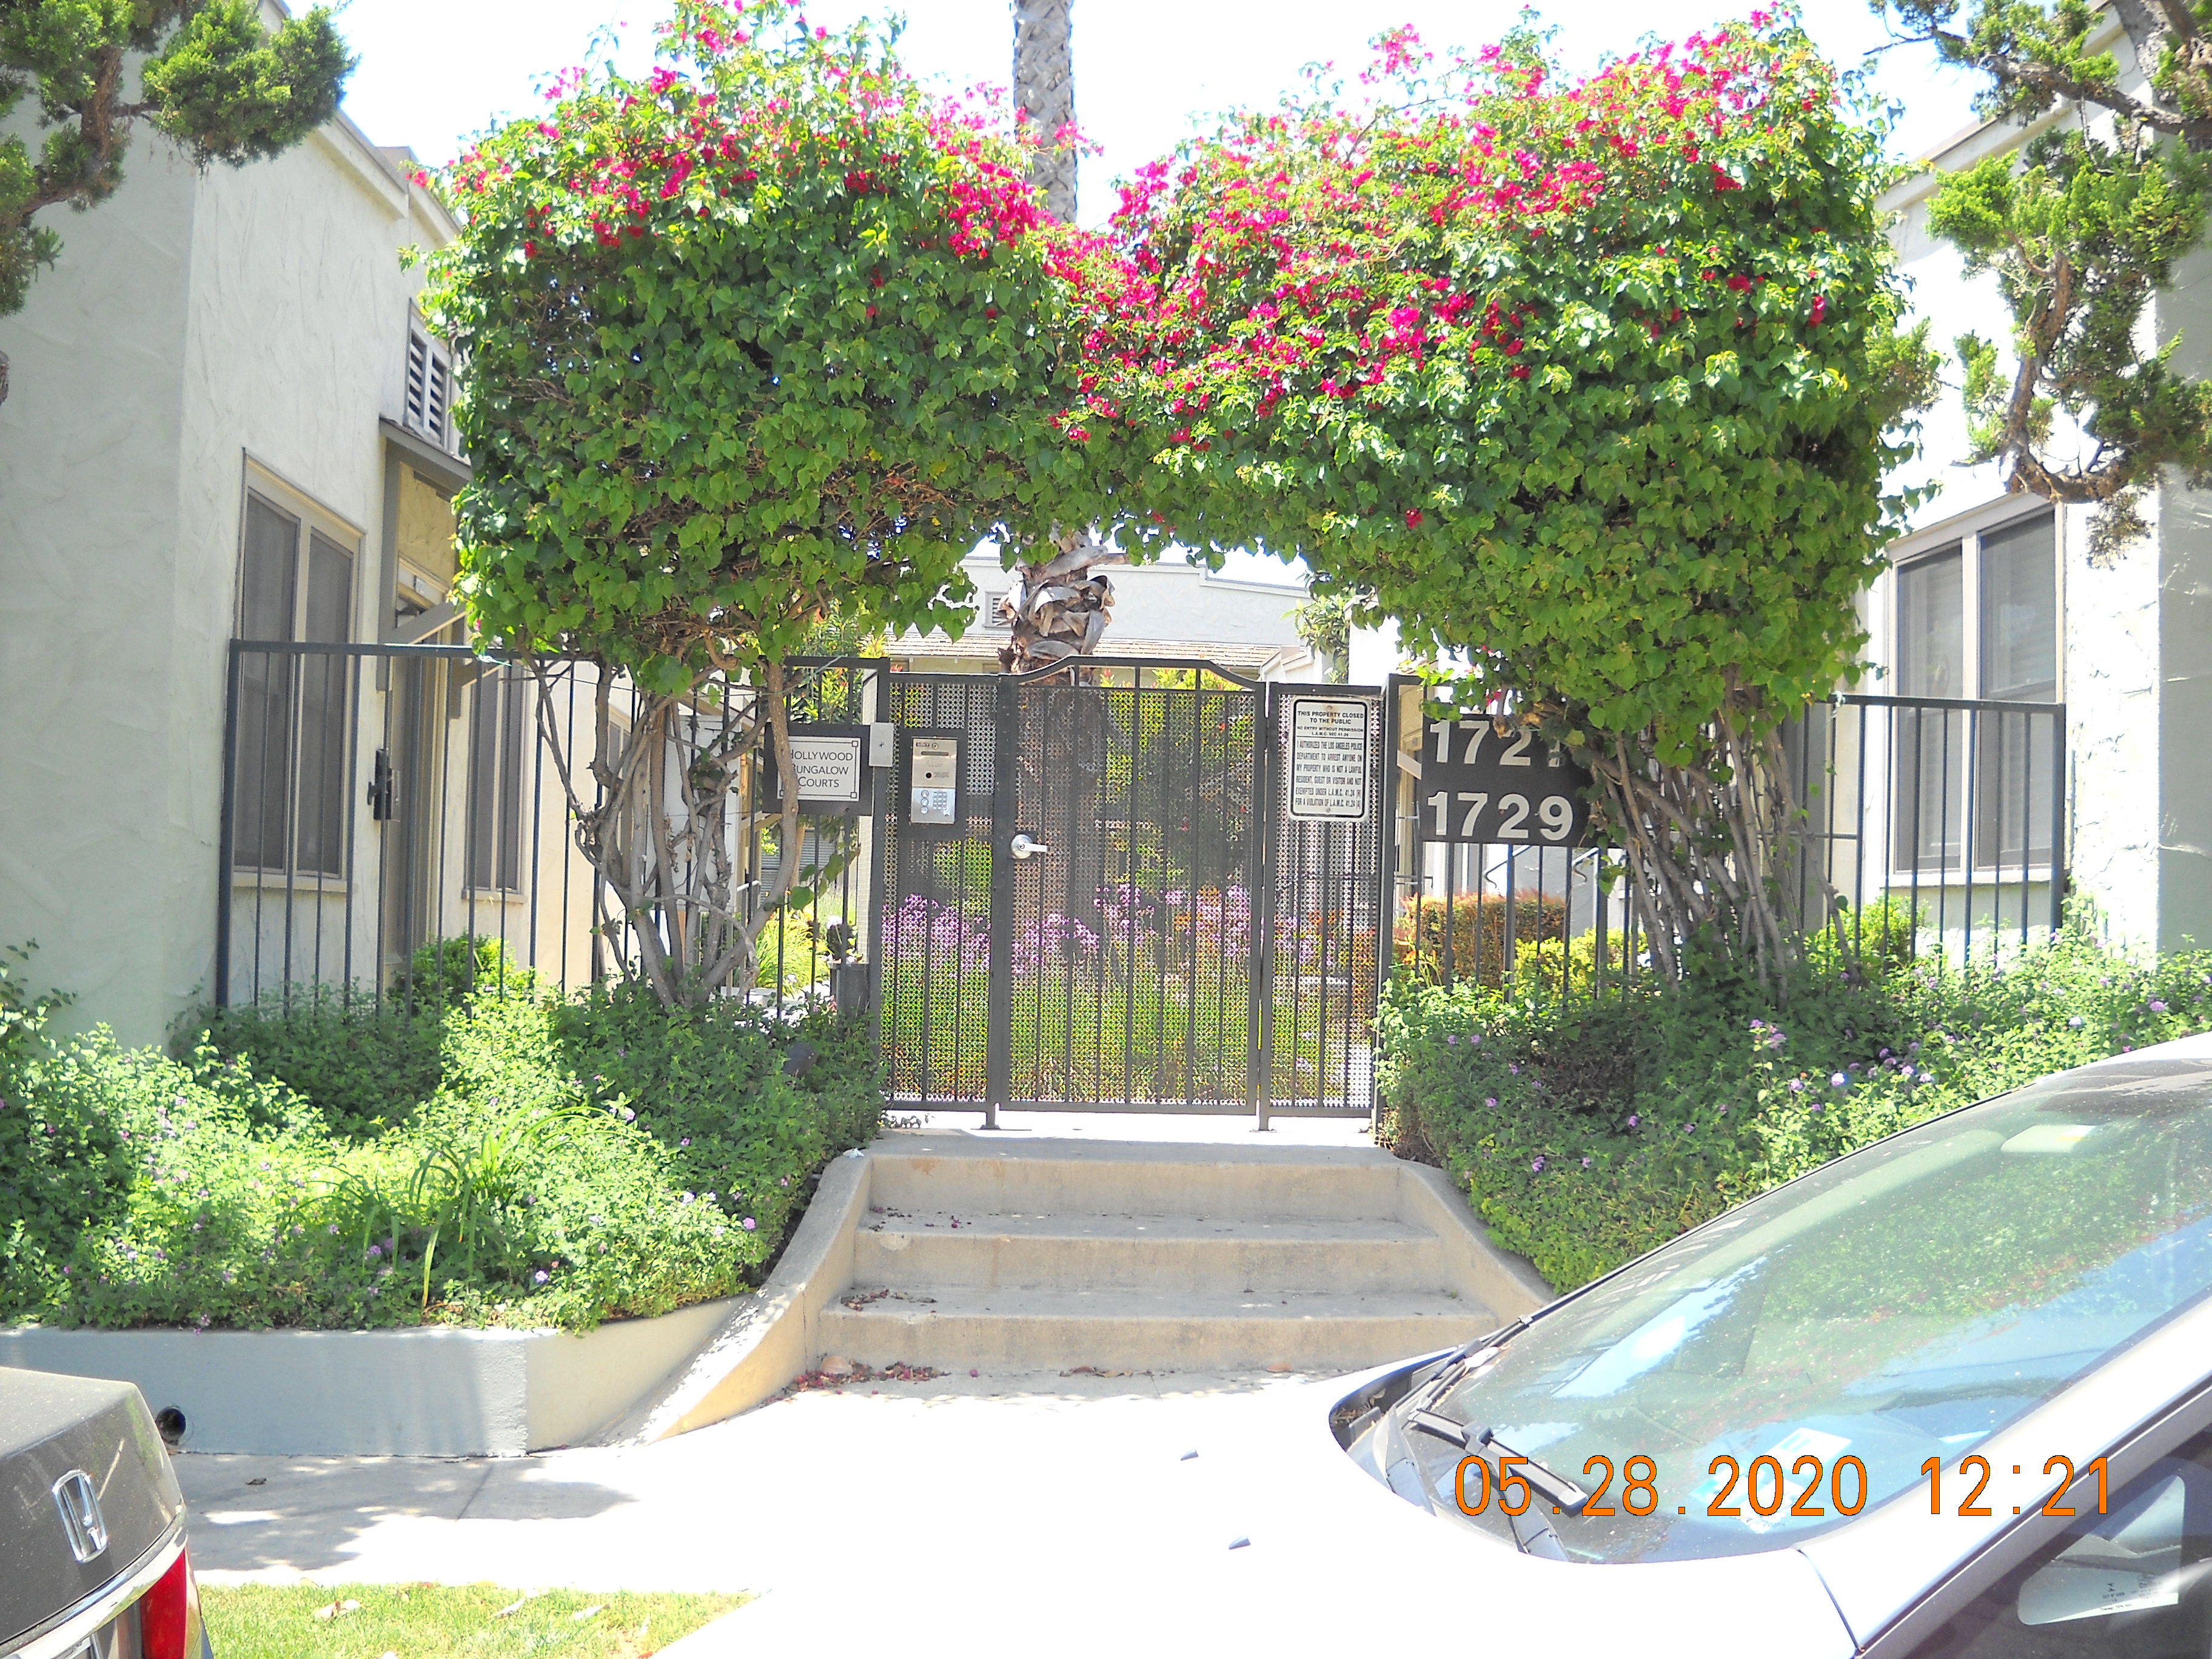 Front view of a gated complex. There is a small staircase leading up to the front gate. There is a keypad. On the sides of the stairs are bushes and trees. Inside the fence are also plants in the center of the passage way leading up to the units.